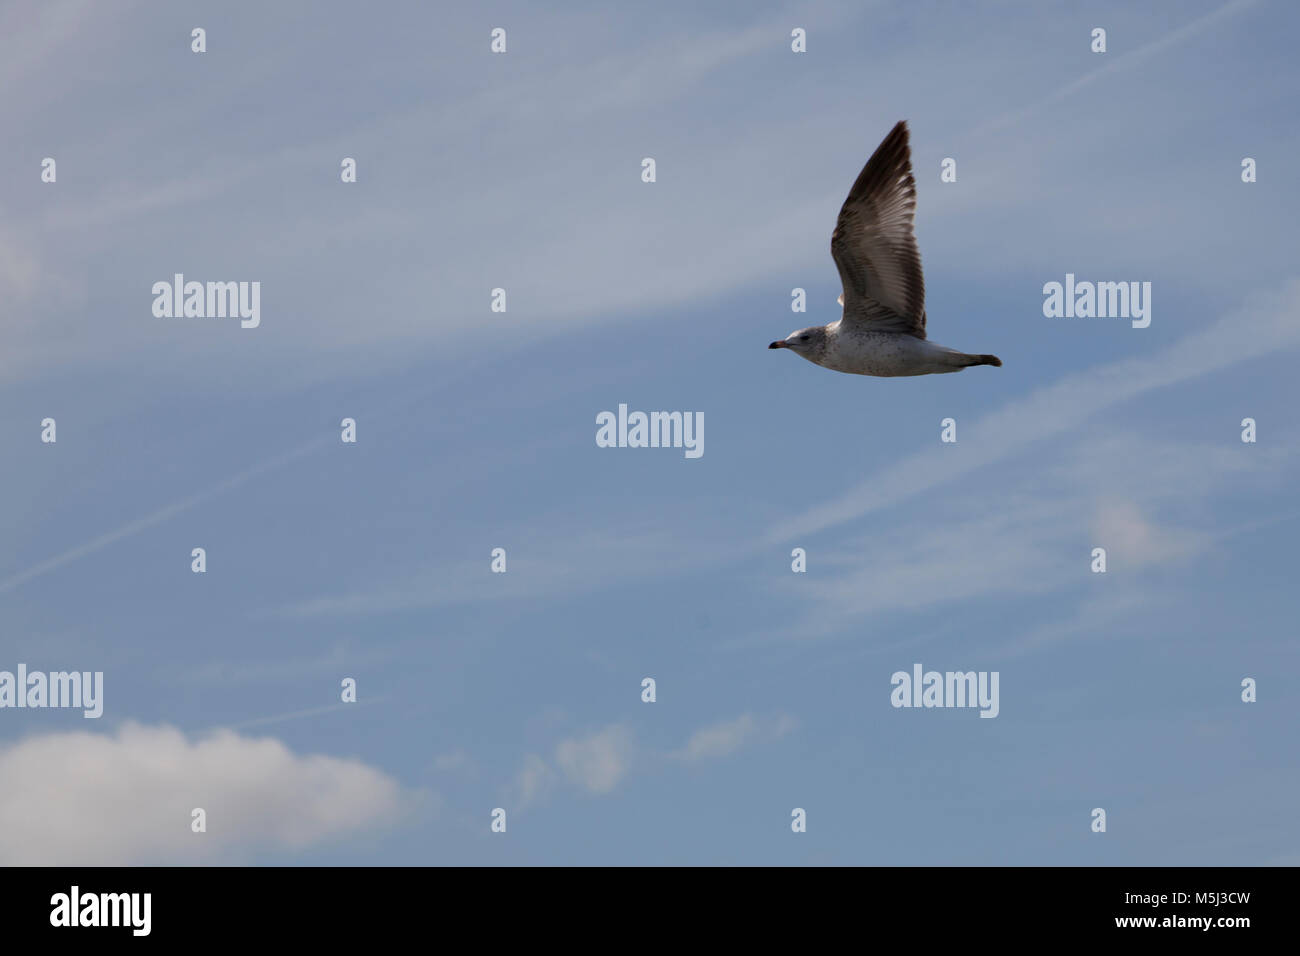 a grey bird flaps wings and soars in a blue sky Stock Photo